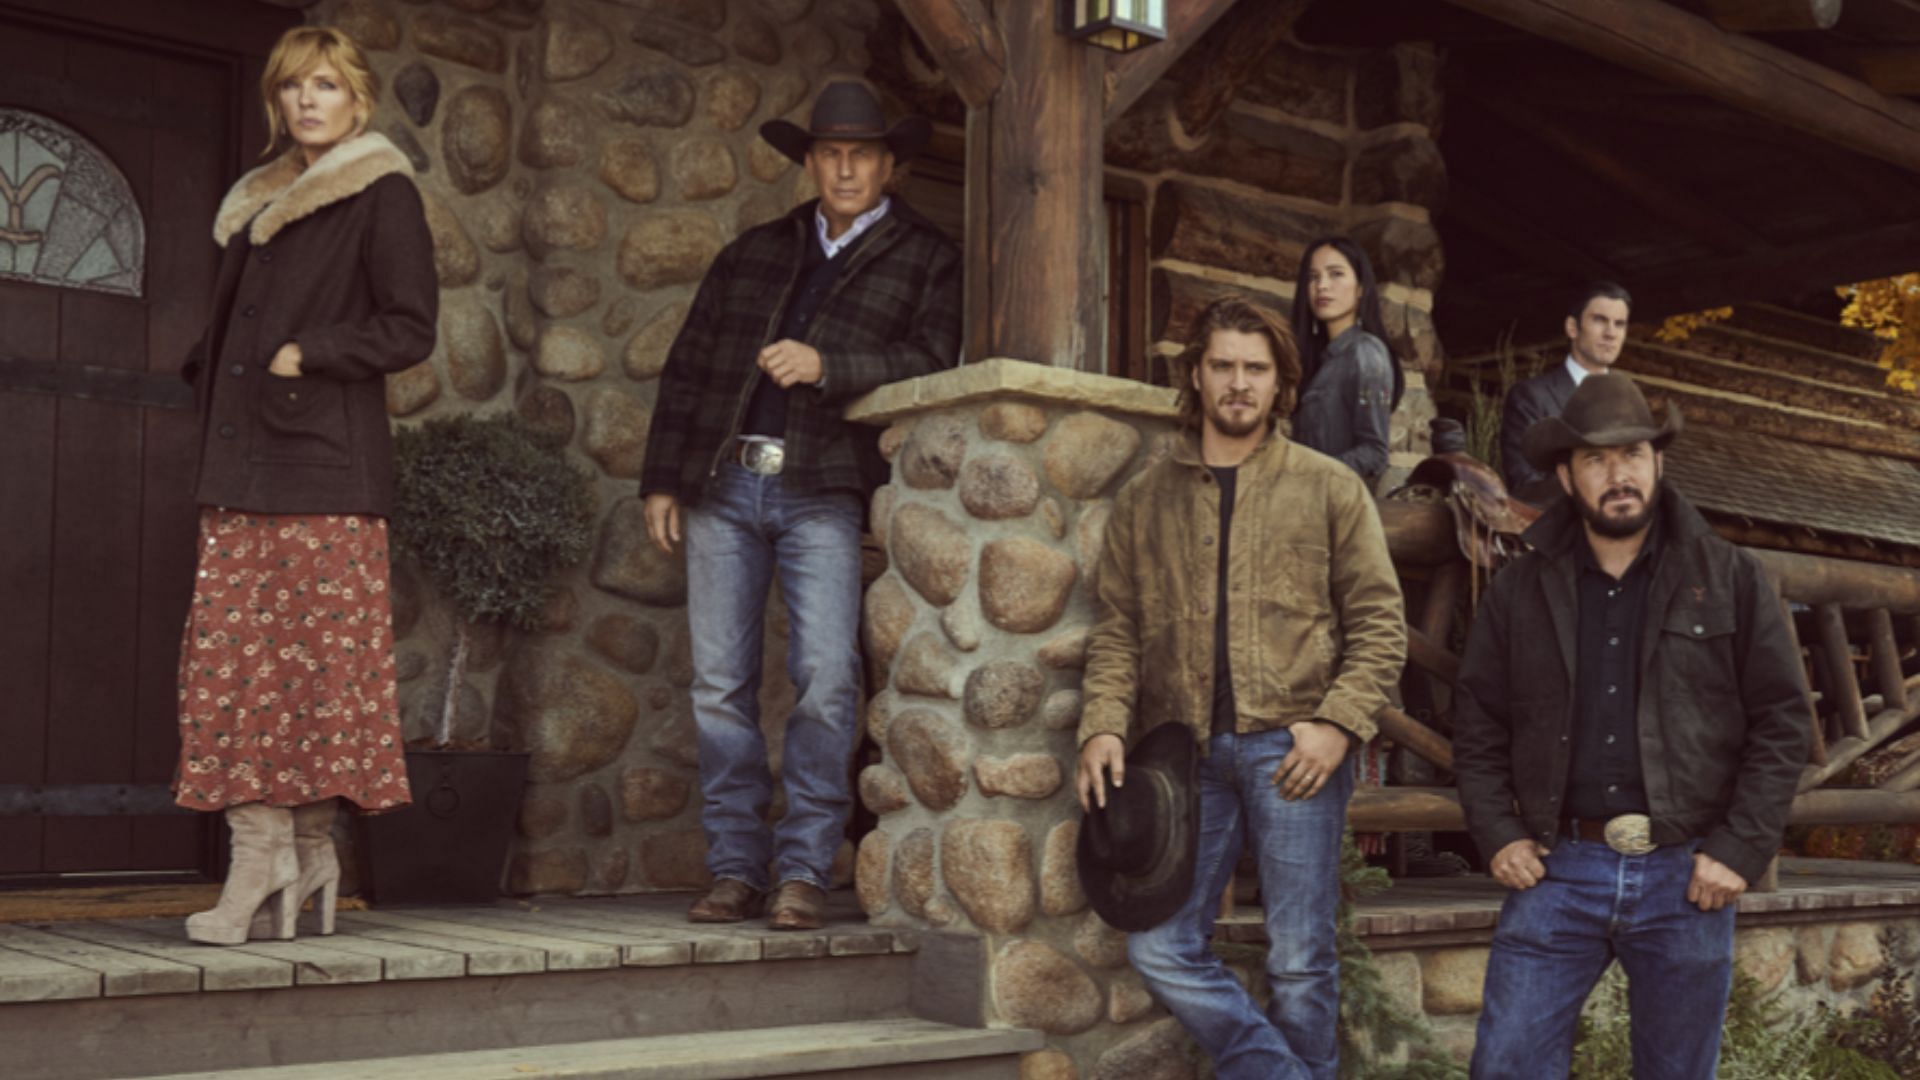 Kevin Costner, Wes Bentley, Cole Hauser, Kelly Reilly, Kelsey Asbille, and Luke Grimes in Yellowstone (Image via IMDb)